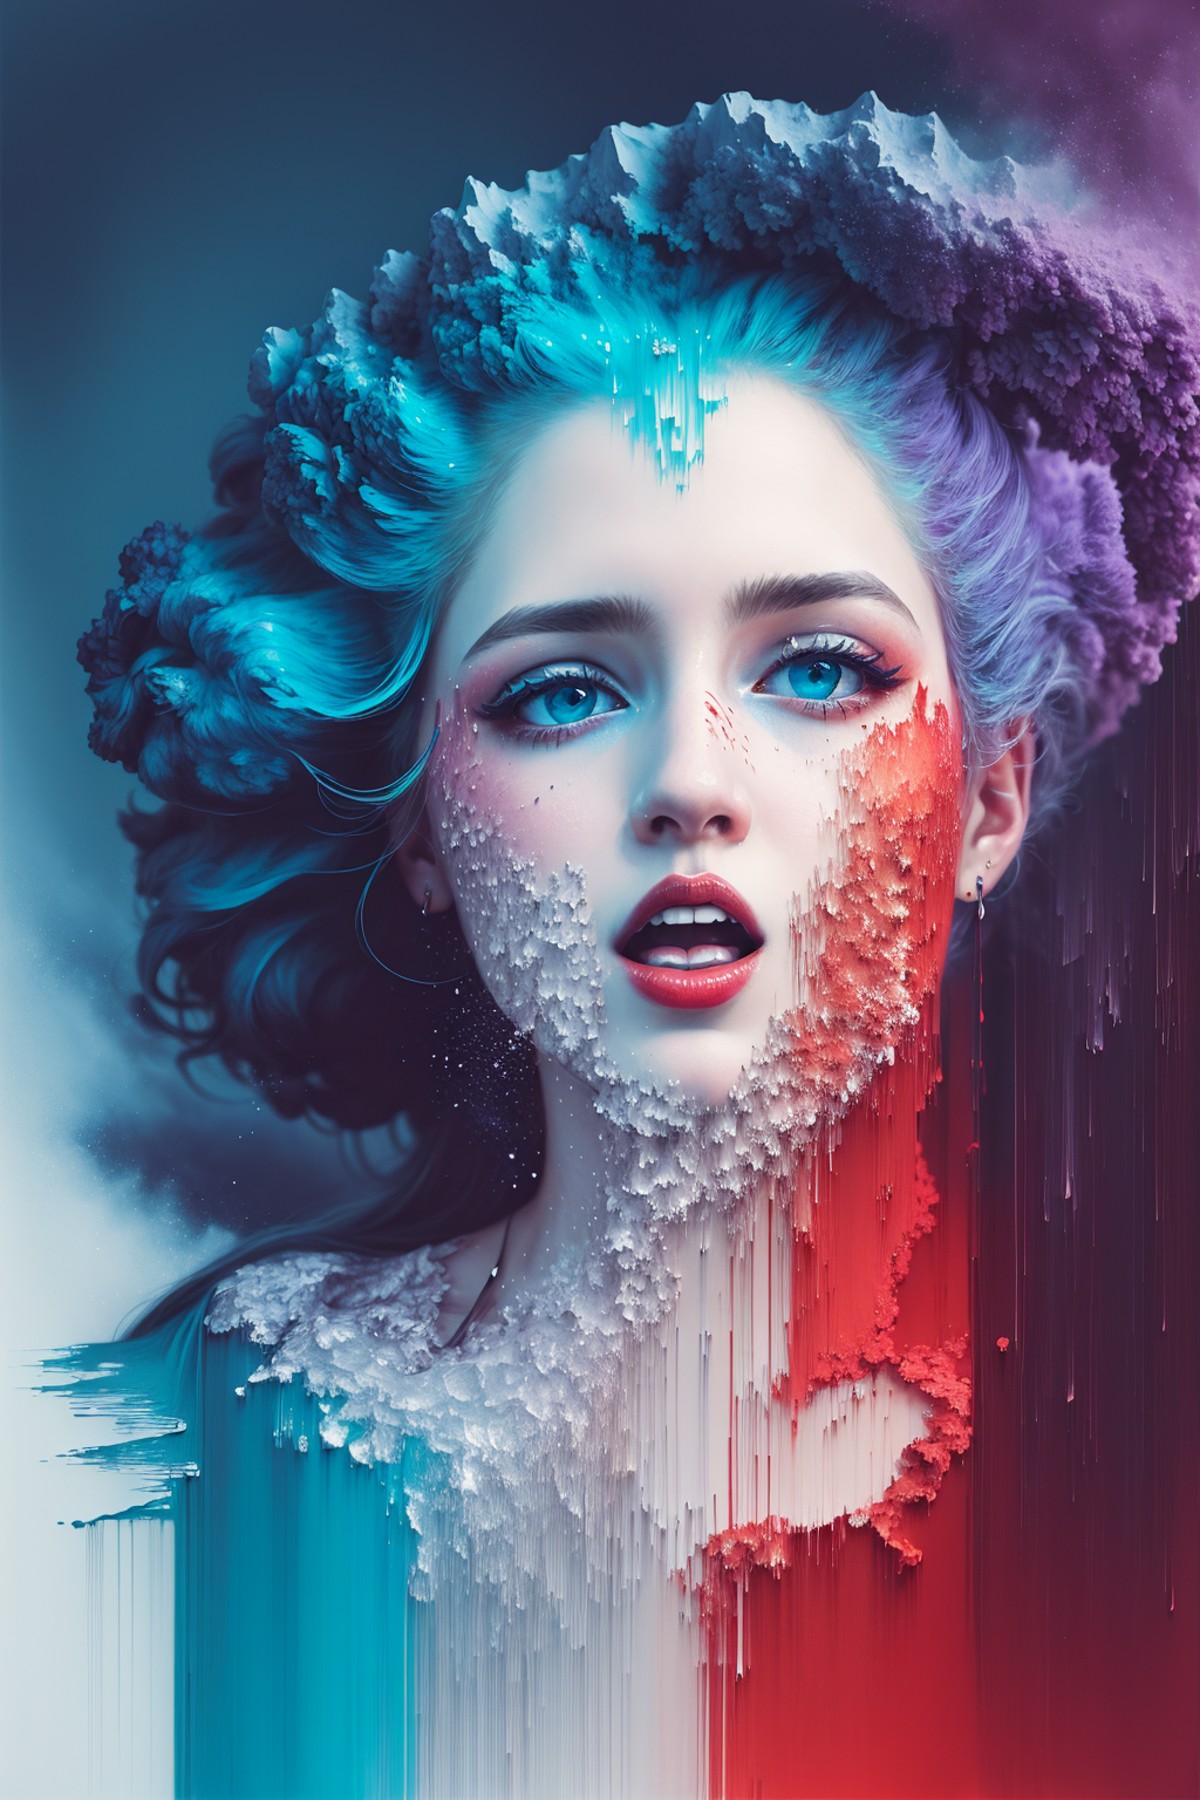 00699-3818043388-0723-pixel sorting, (Paint colliding and splashing on the canvas), girl's side face blends into it,((side face)),open mouth, Liquid s.png